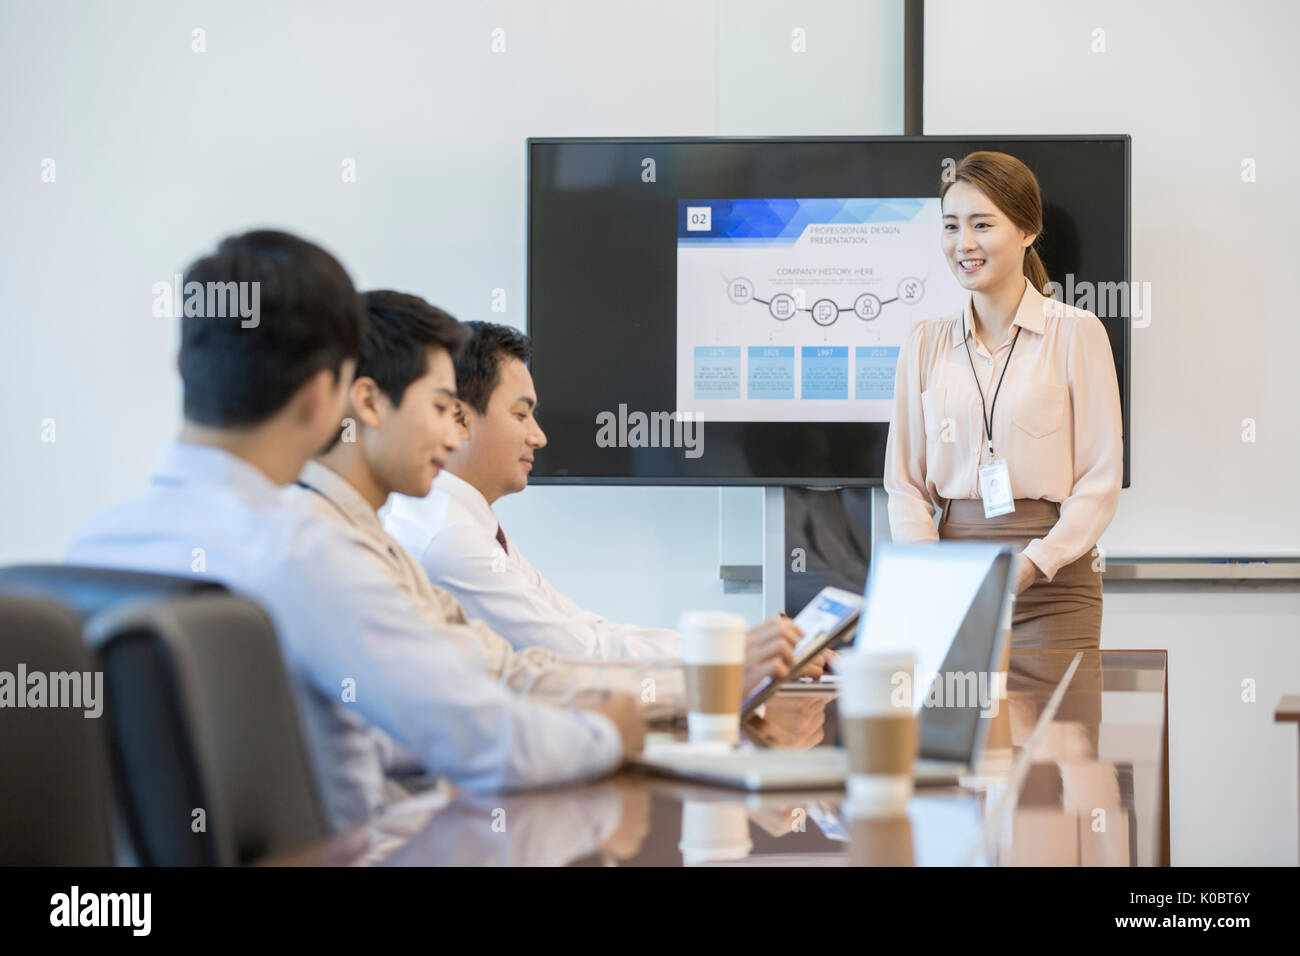 Smiling businesswoman having a presentation in front of her coworkers Stock Photo